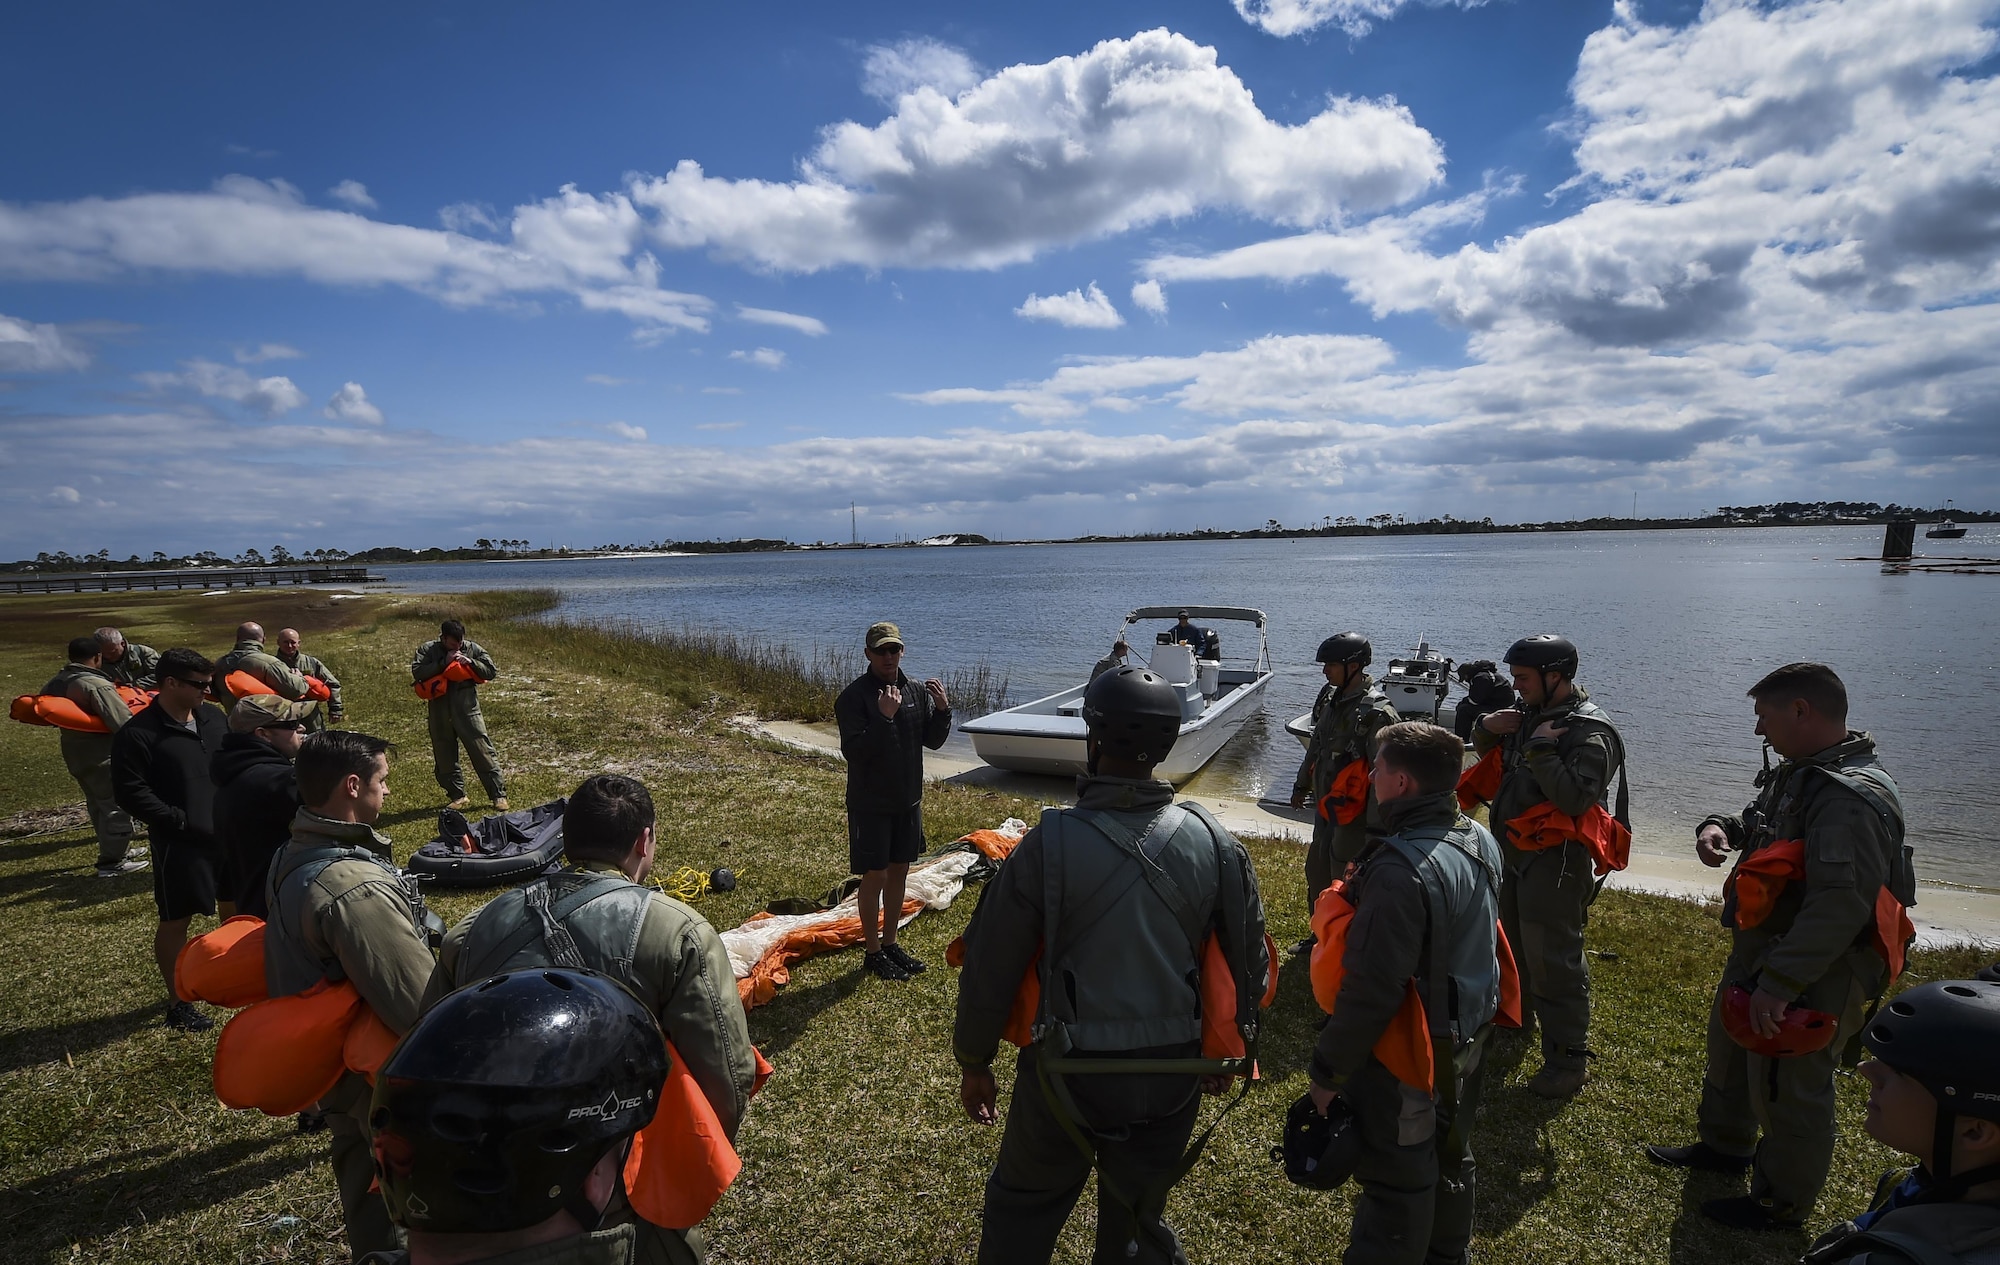 Staff Sgt. Tommy Dreher, a survival, evasion, resistance and escape specialist with the 1st Special Operations Support Squadron, instructs aircrew during water survival training at Hurlburt Field, Fla., March 14, 2017. SERE specialists with the 1st SOSS instructed aircrew on three different required refresher trainings tri-annually to ensure aircrew are ready to execute operations. (U.S. Air Force photo by Airman 1st Class Joseph Pick)